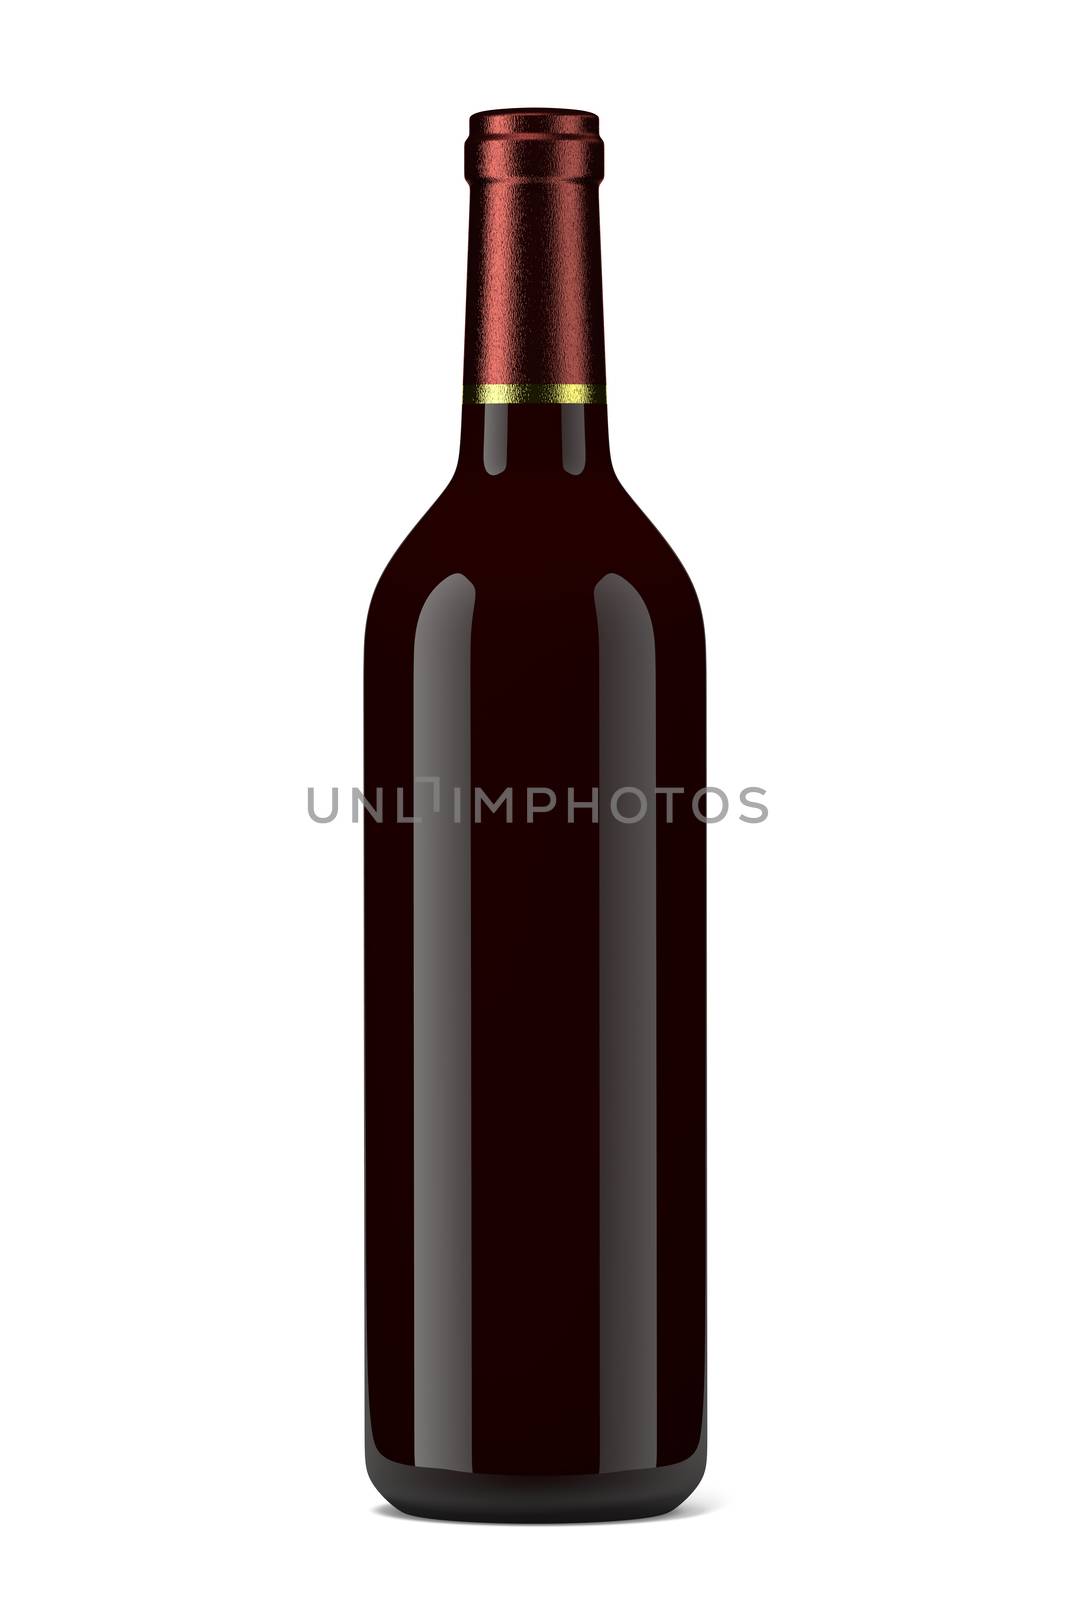 Single Glass Wine Bottle without Label on White Background